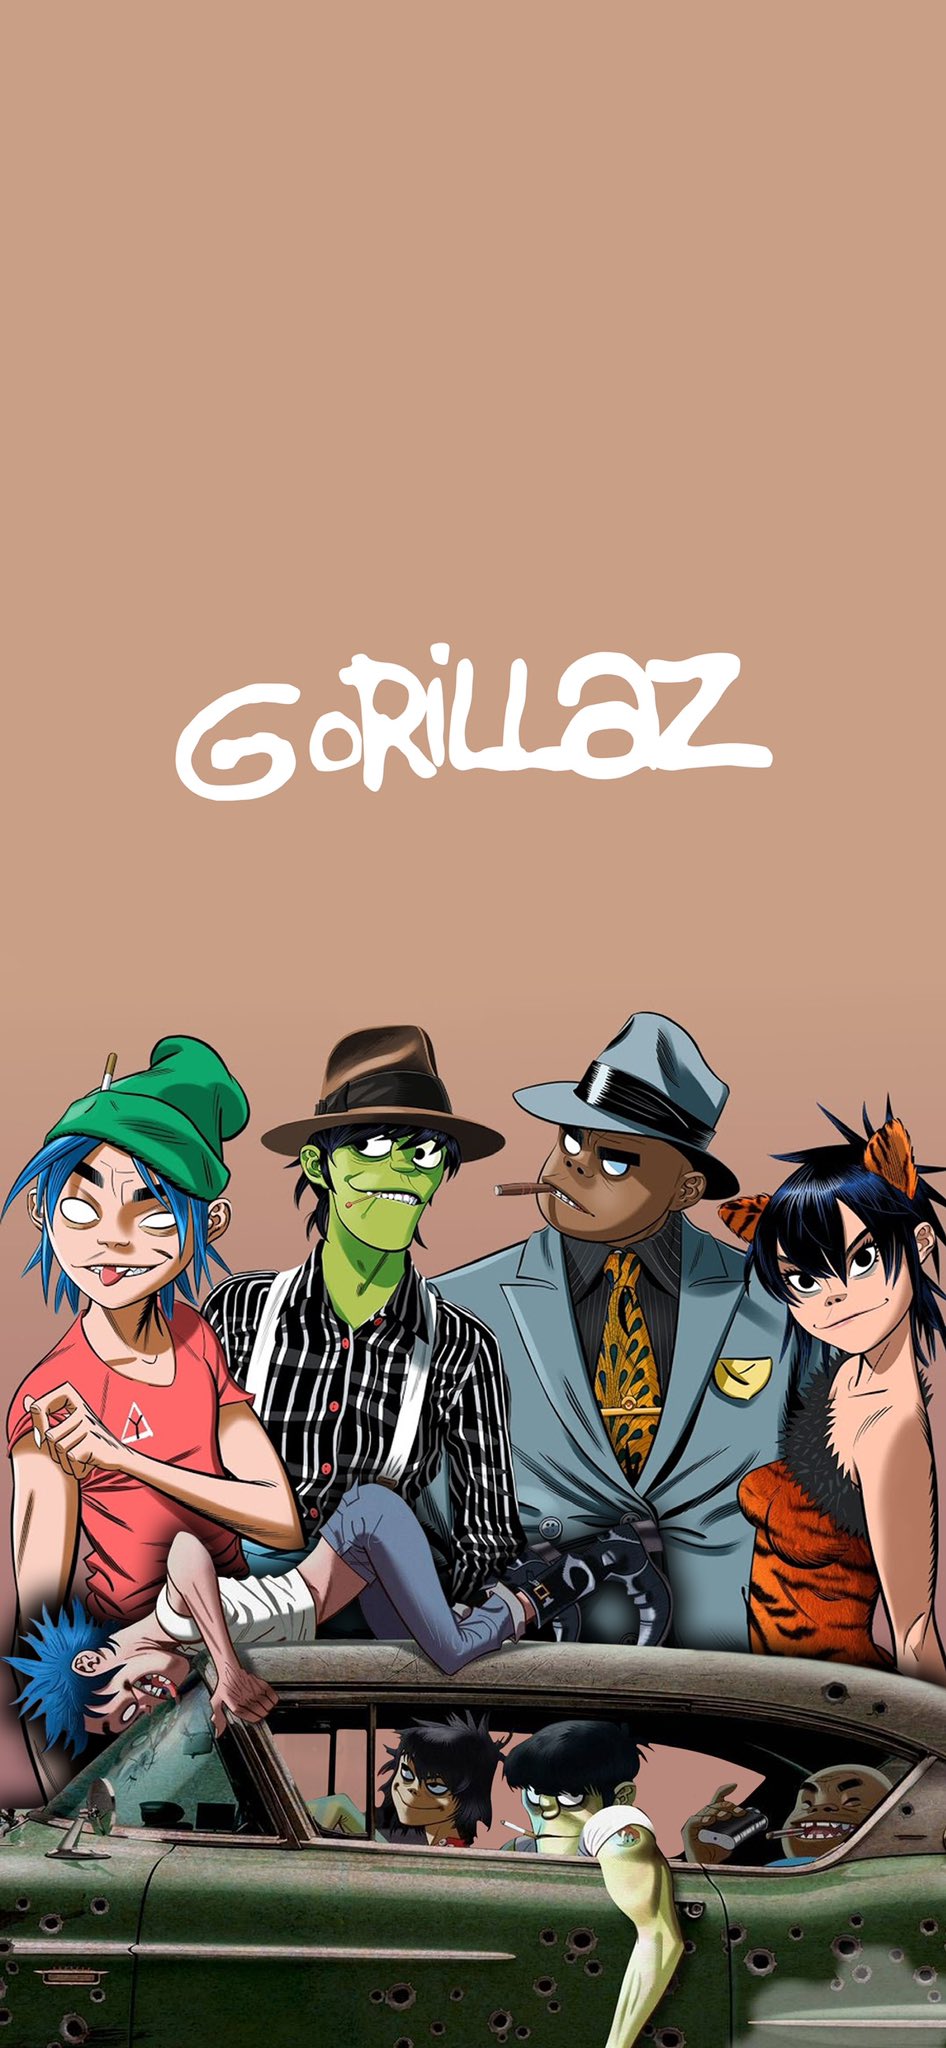 70 Gorillaz HD Wallpapers and Backgrounds